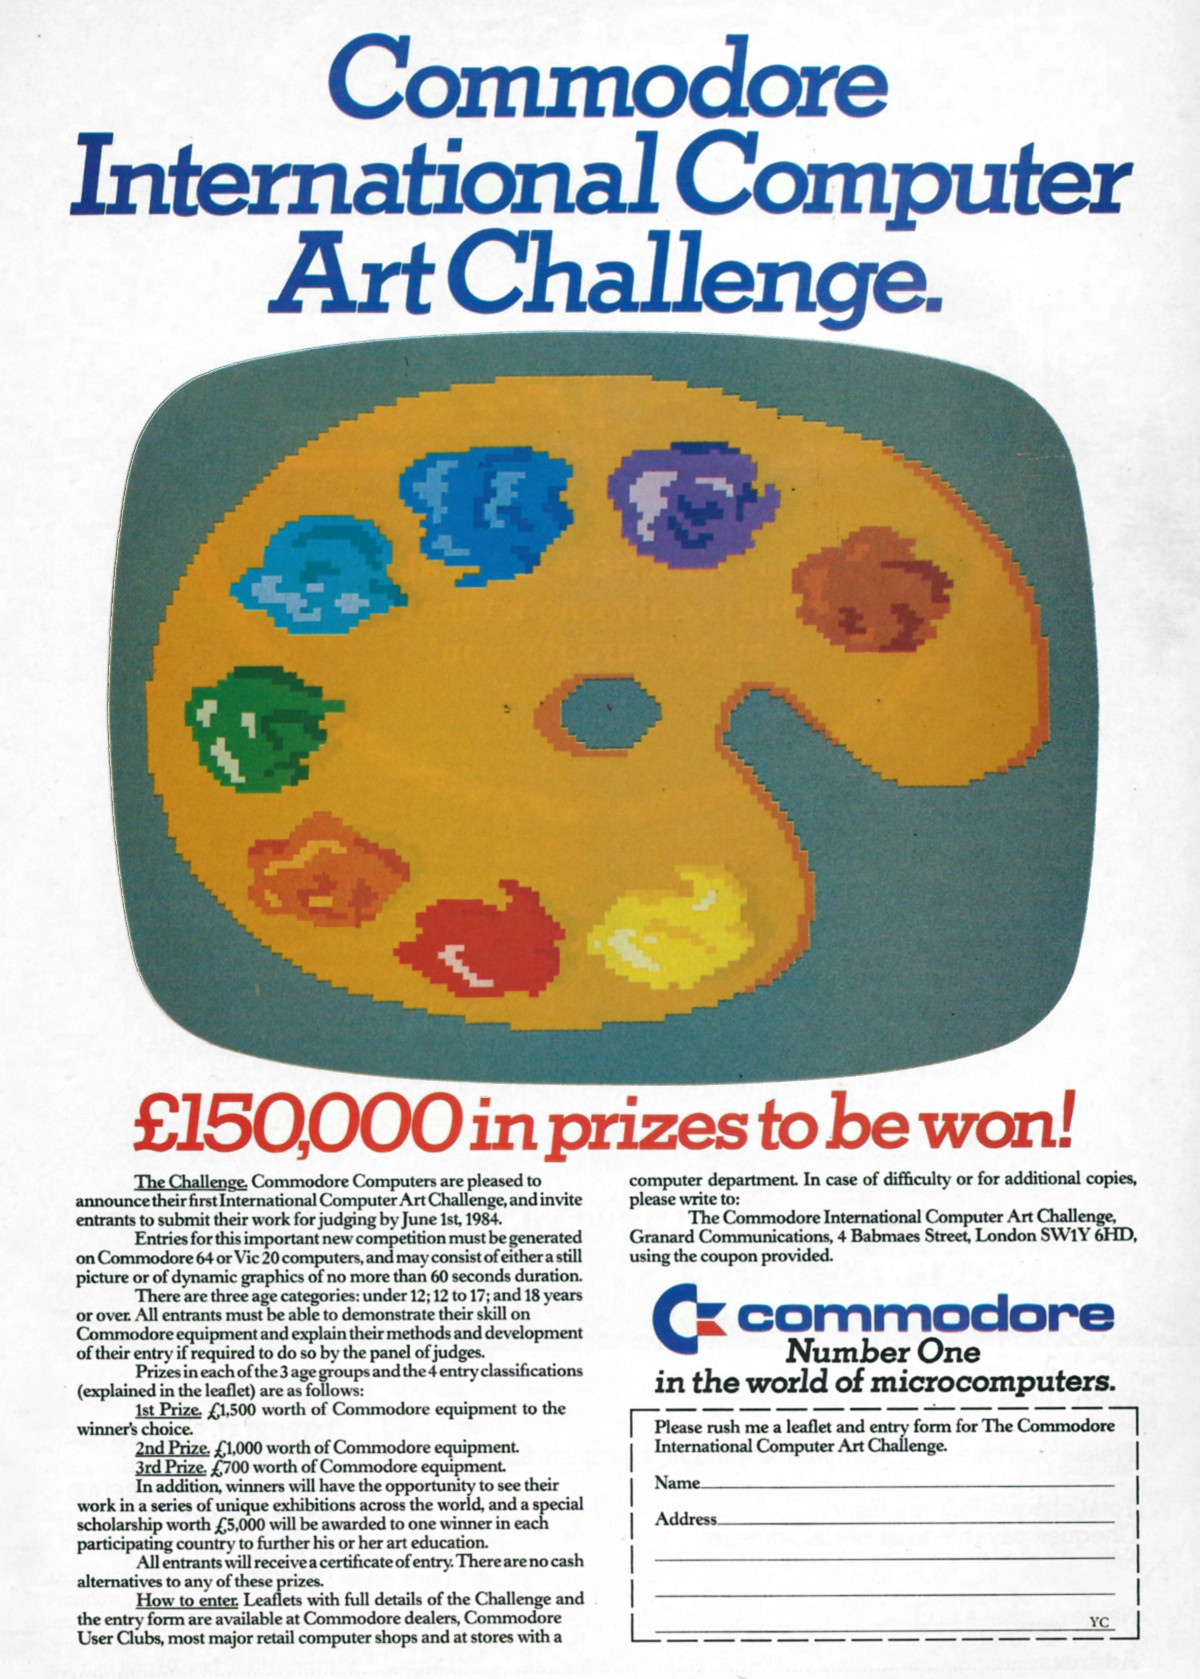 An advert for <span class='hilite'><span class='hilite'>Commodore</span></span>'s International Computer Art Challenge, from Your Computer, May 1984